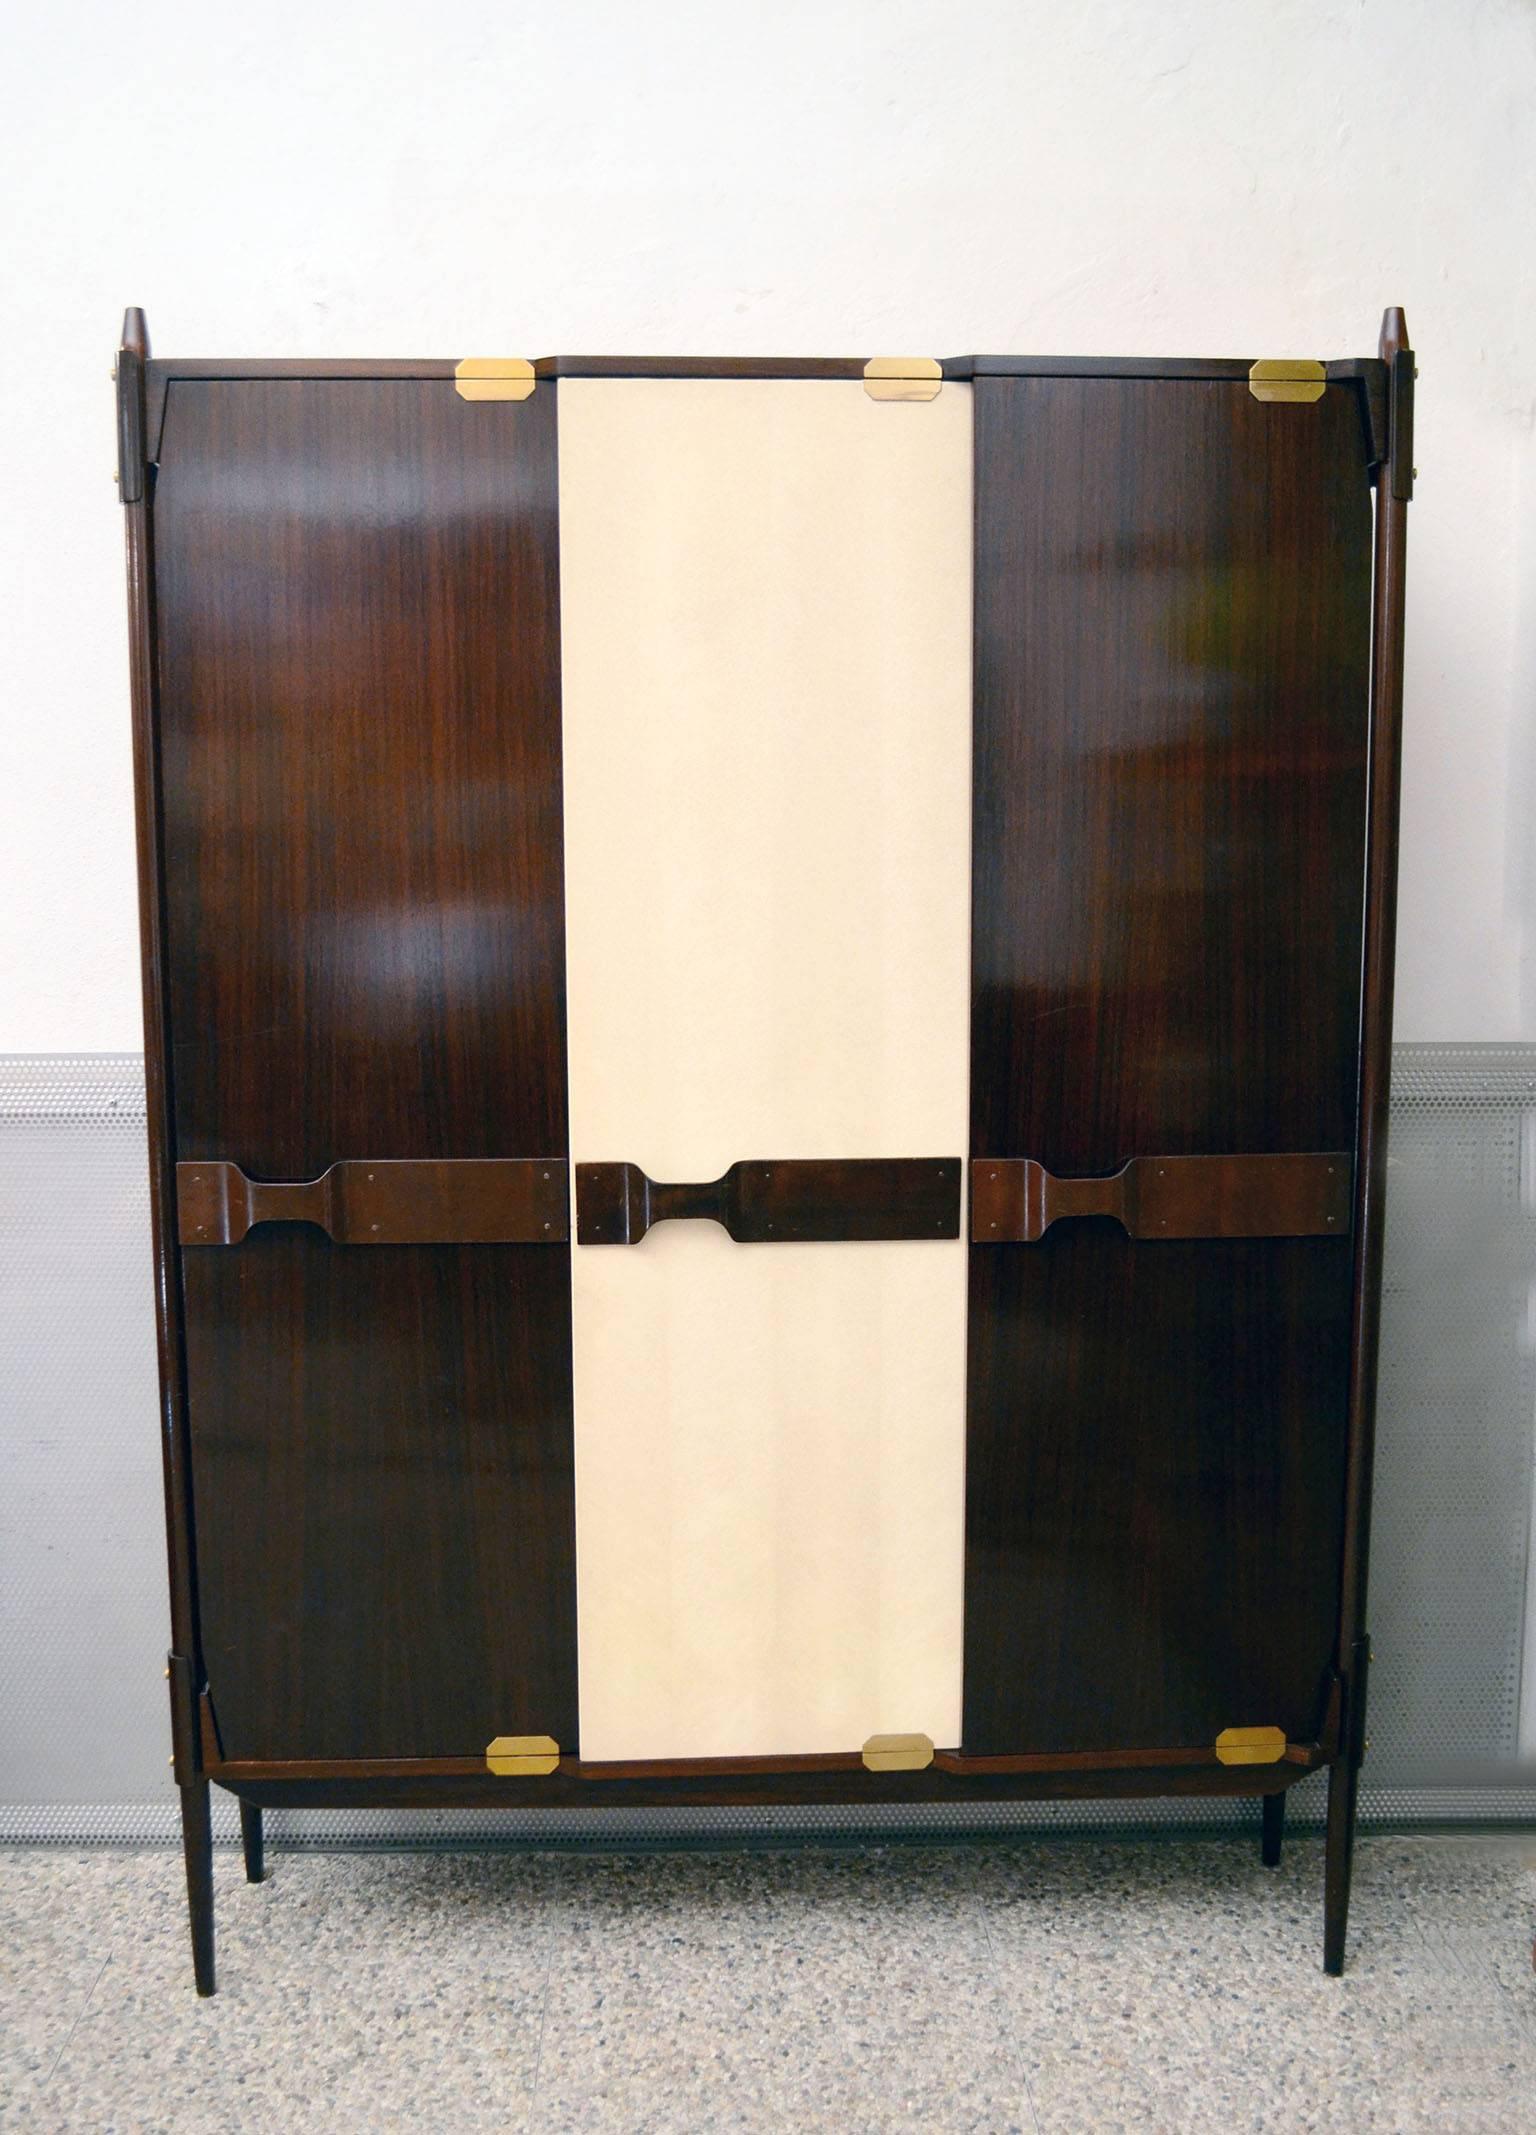 Wardrobe of Italian, 1950s production, attributed to Ico Parisi.
Uprights in solid rosewood, internal finishing and central door covered in vipla.
Handles in curved wood, clothes hangers and details in brass.